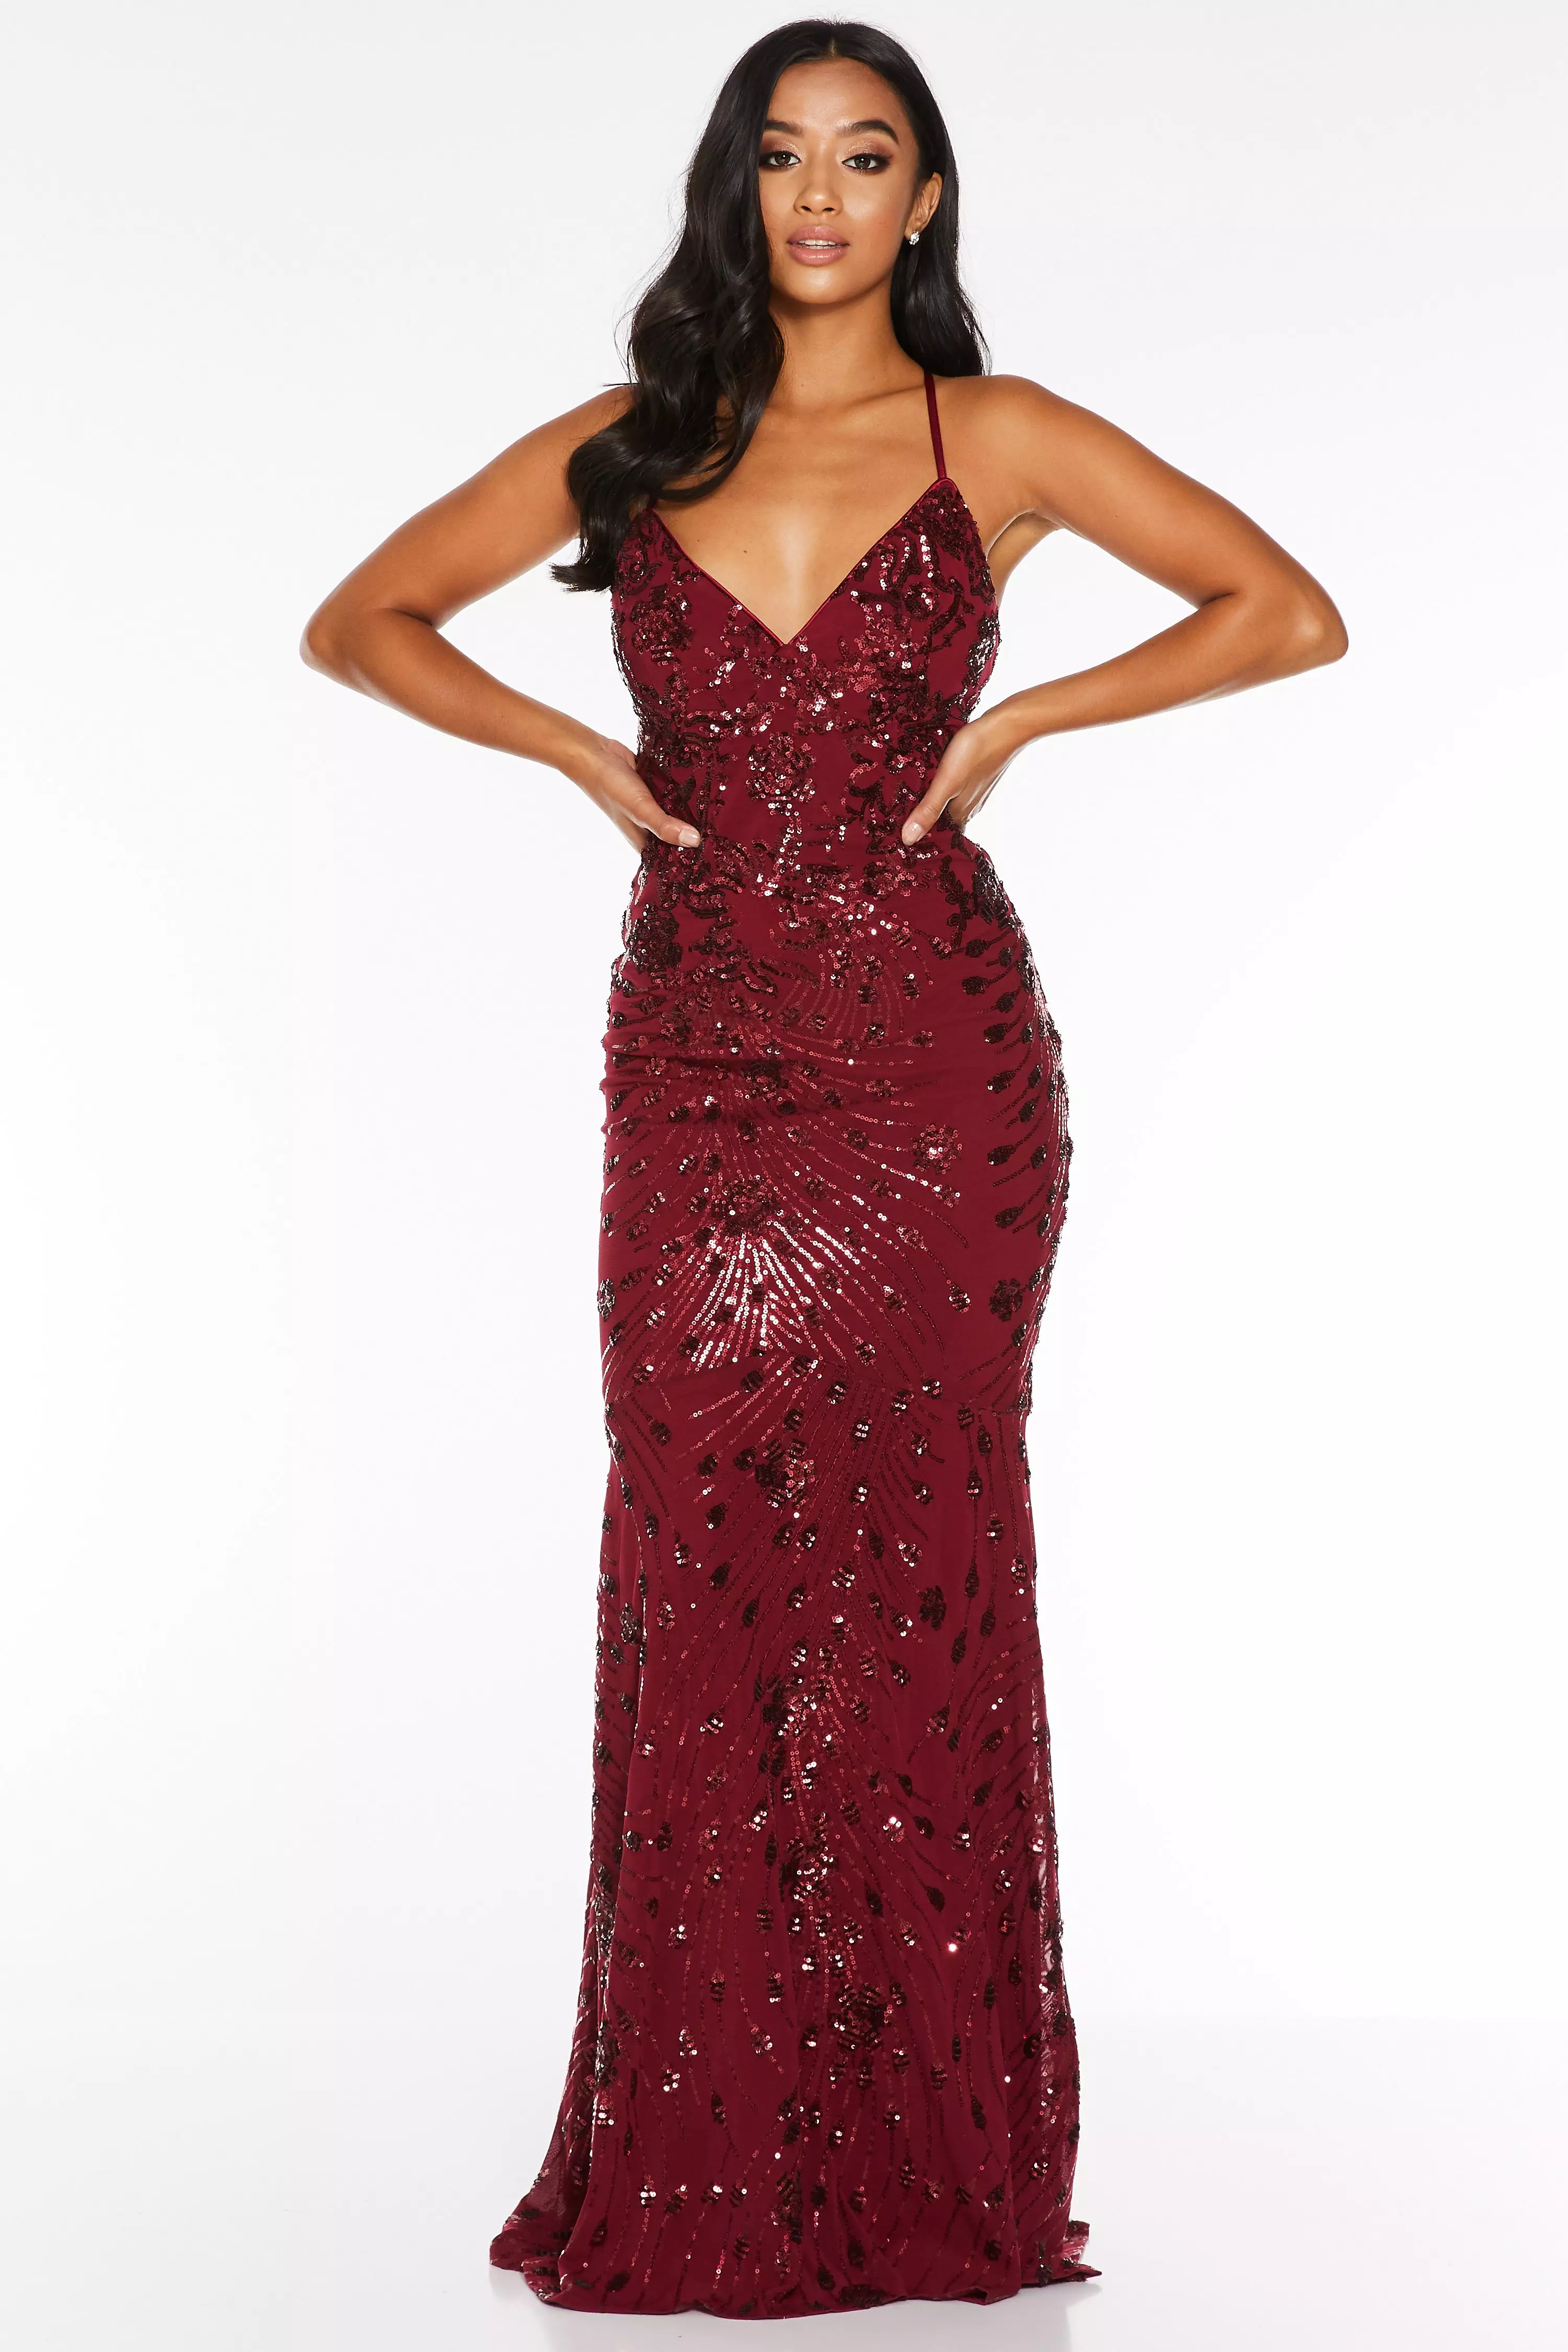 Petite Berry Sequin Backless Fishtail 